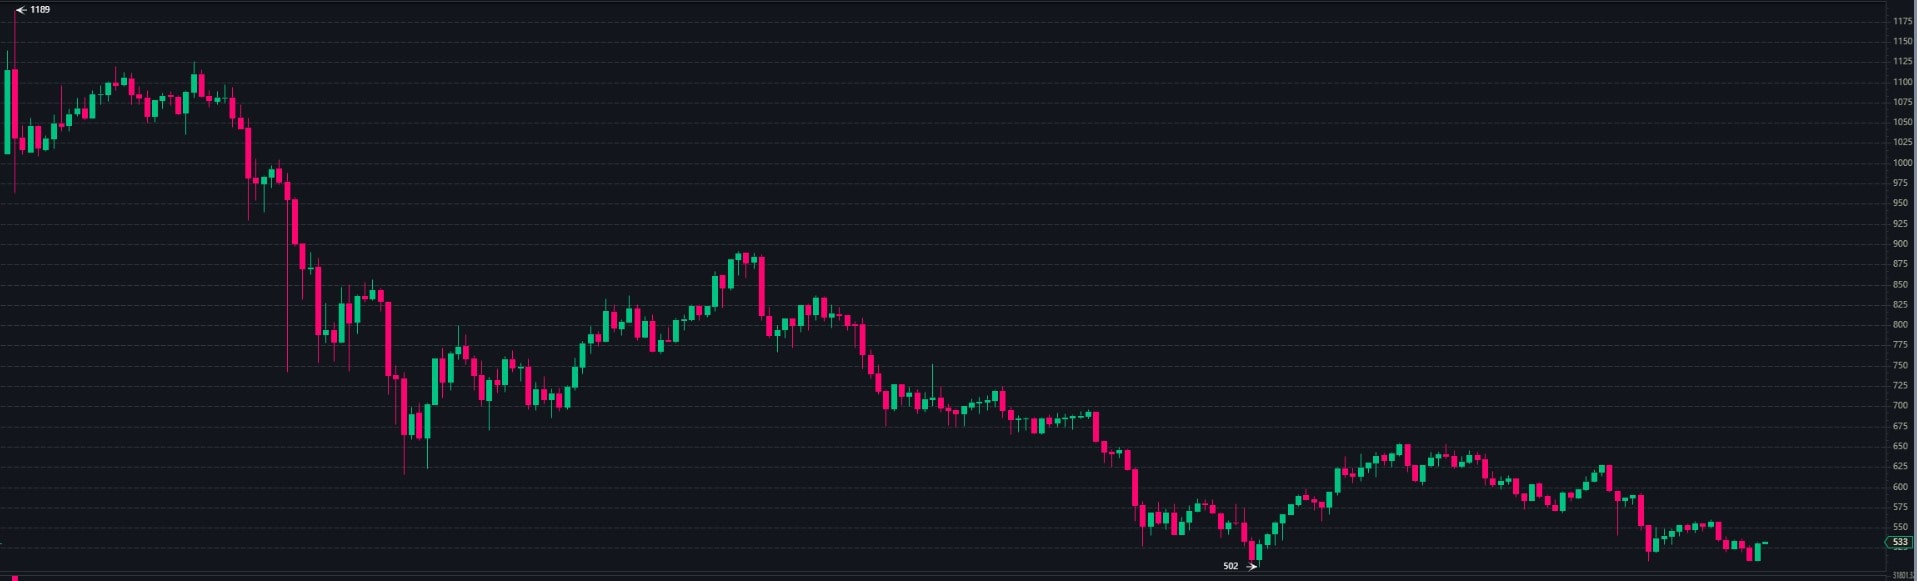 Binance DeFi Index Tumbles Over 50% on Its First Month and There Is Even Worse News